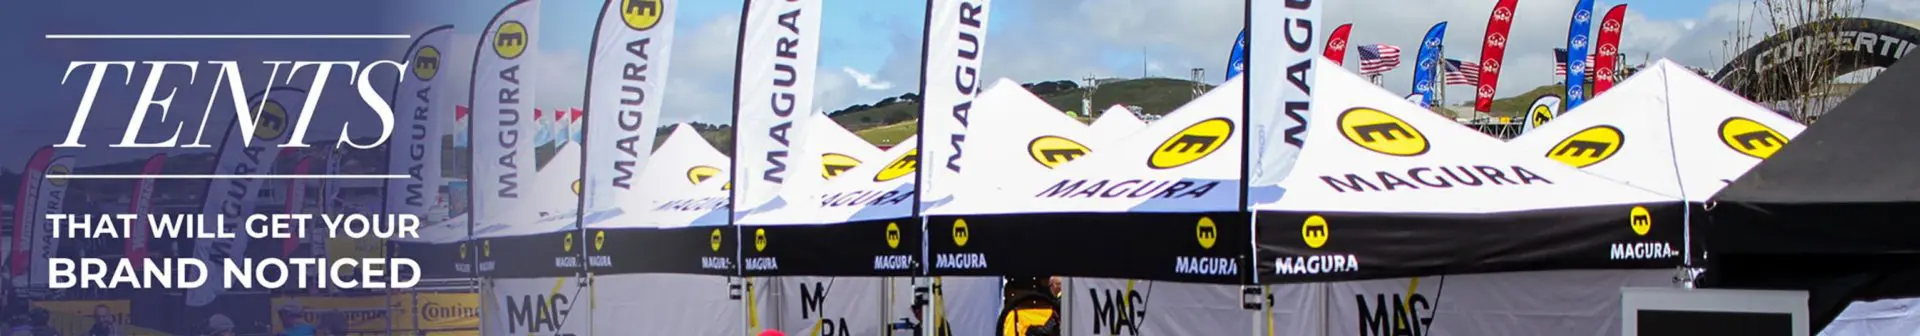 magura tents and banners made by strike visuals